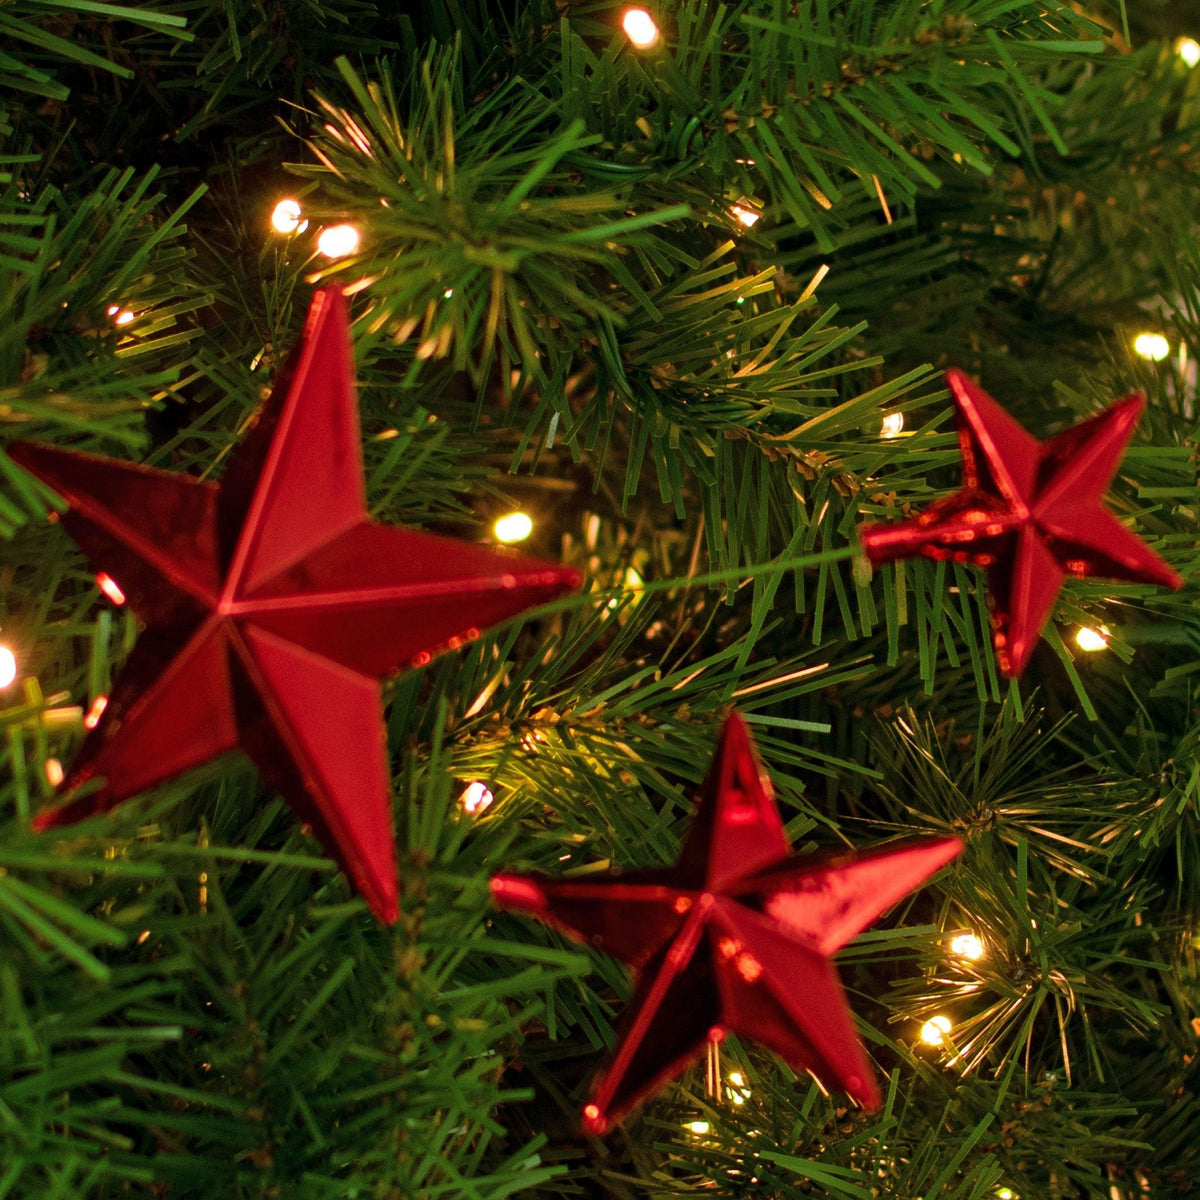 These Red Star Pick Ornaments are versatile enough to be used in a variety of ways, such as adorning wreaths, garlands, and other holiday decor. Their elegant and timeless design ensures they will become cherished keepsakes for years to come.